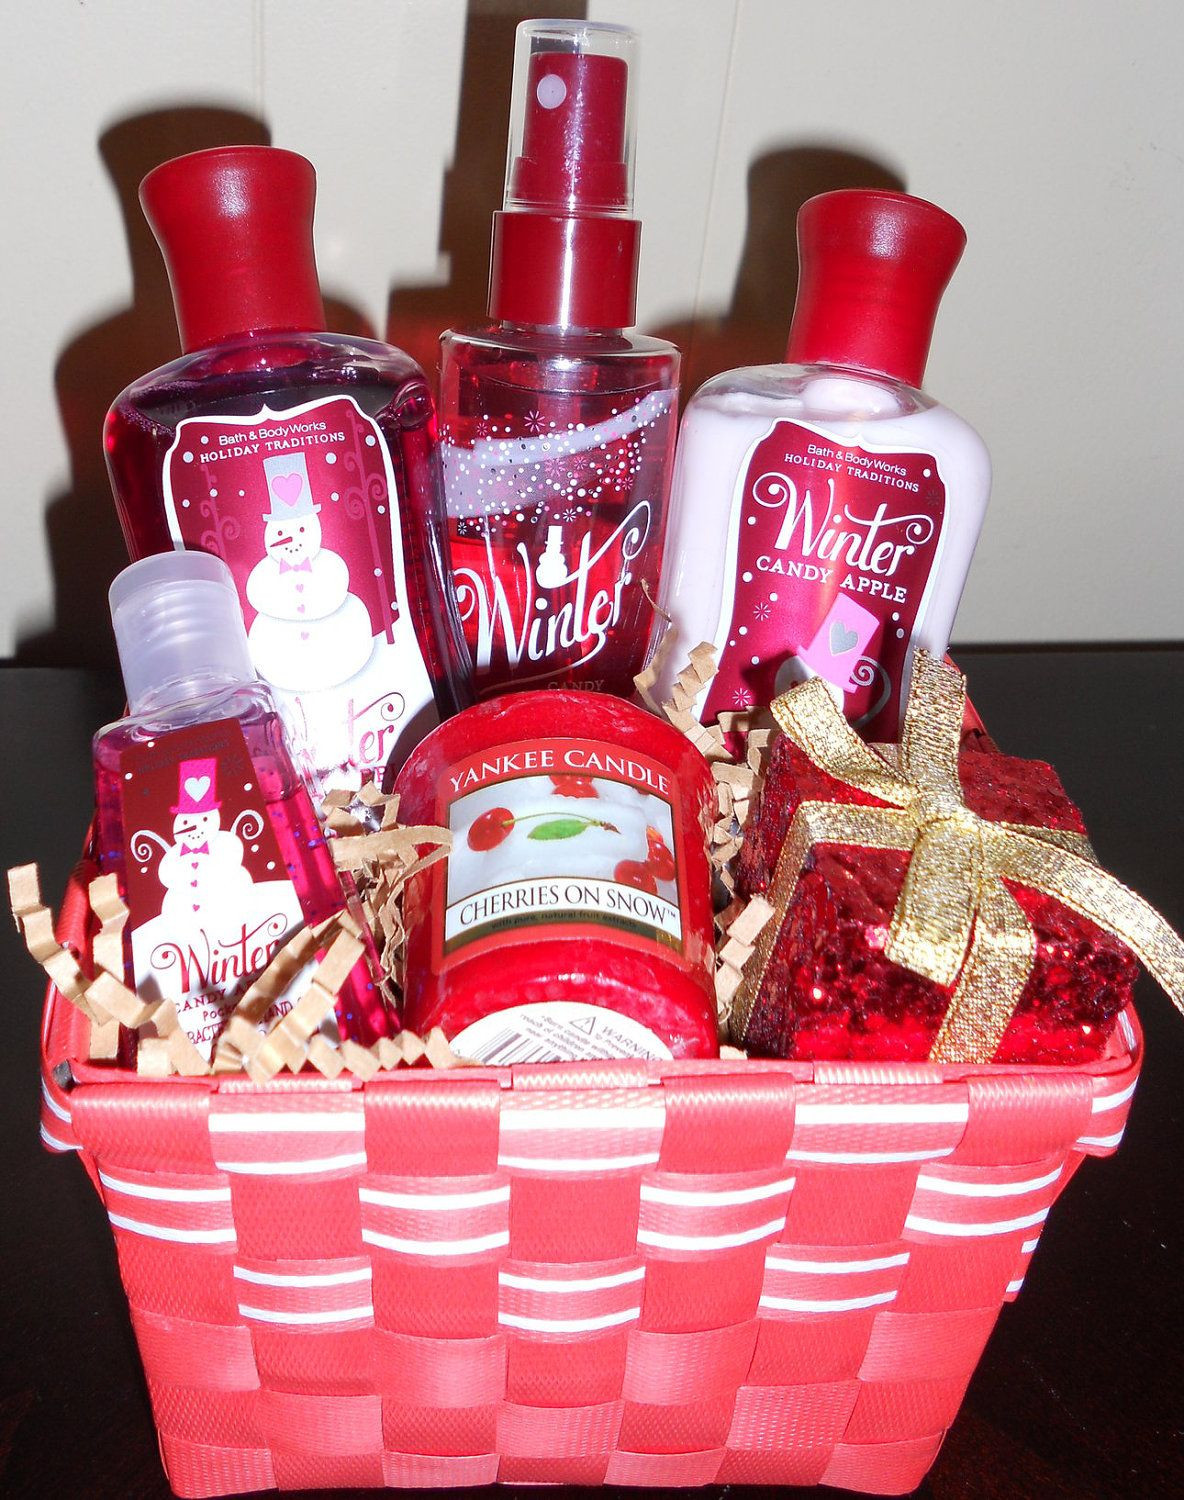 Bath And Body Gift Basket Ideas
 holiday t basket winter candle apple bath body works